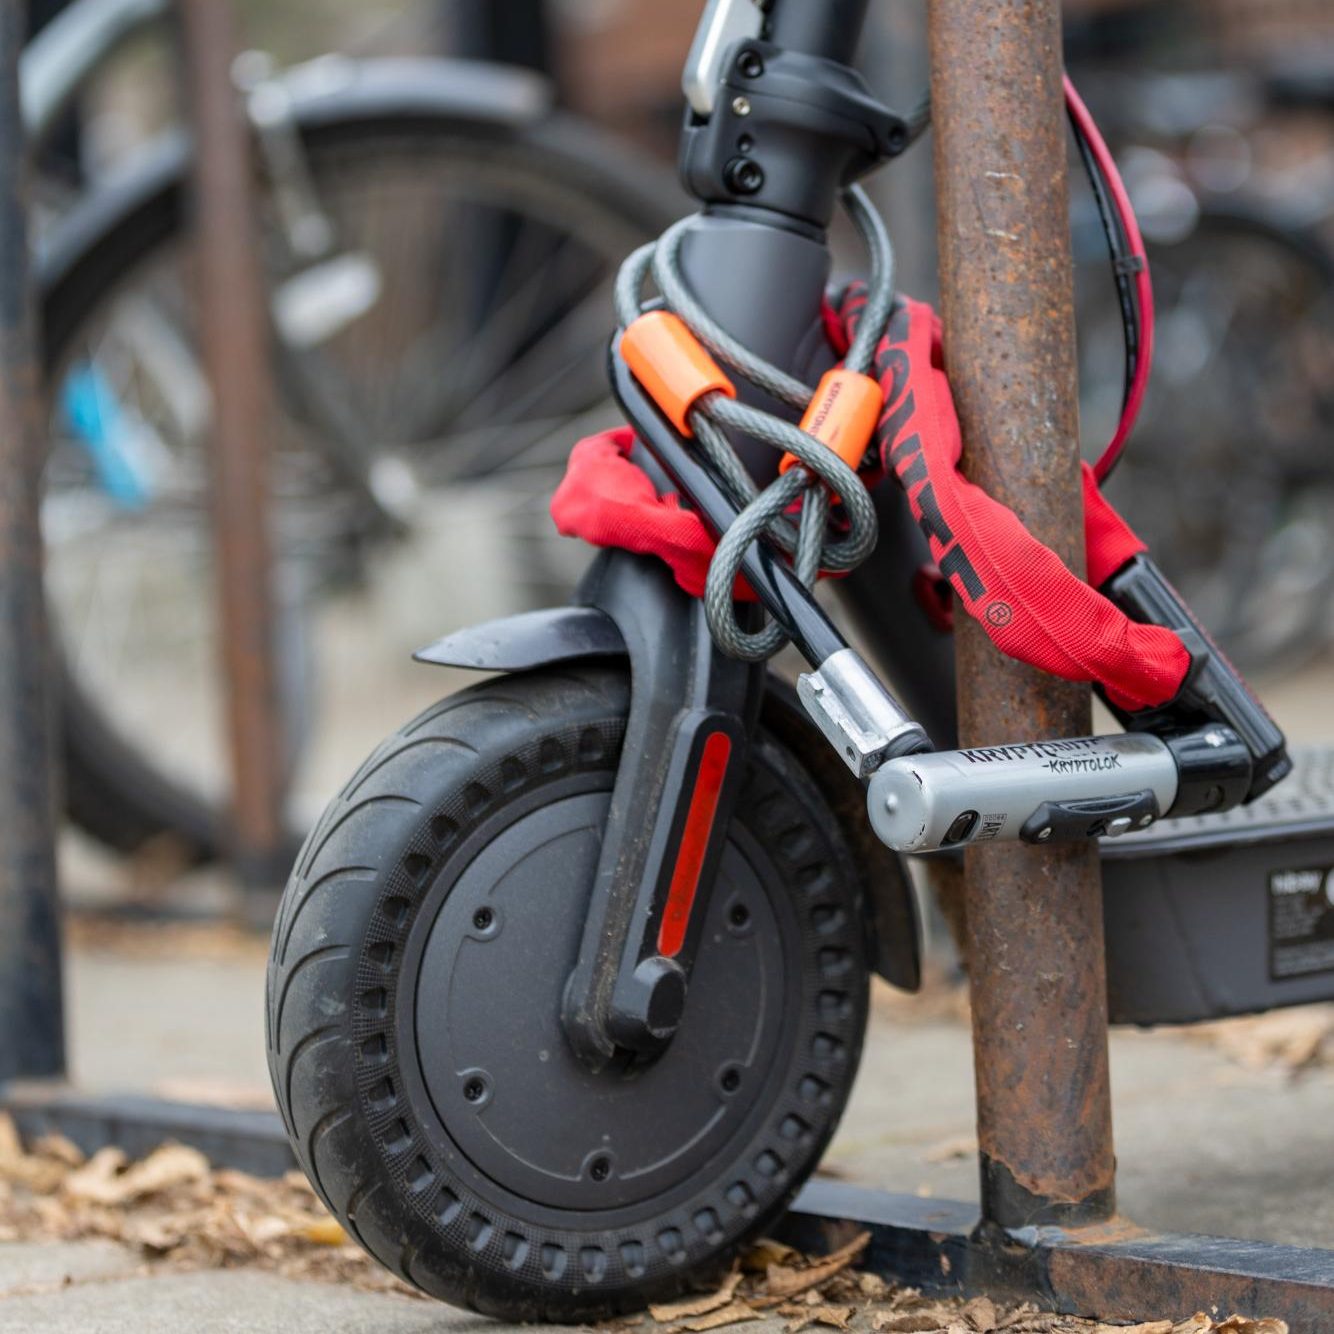 An electric scooter at a bike rack on the Oregon State University campus.